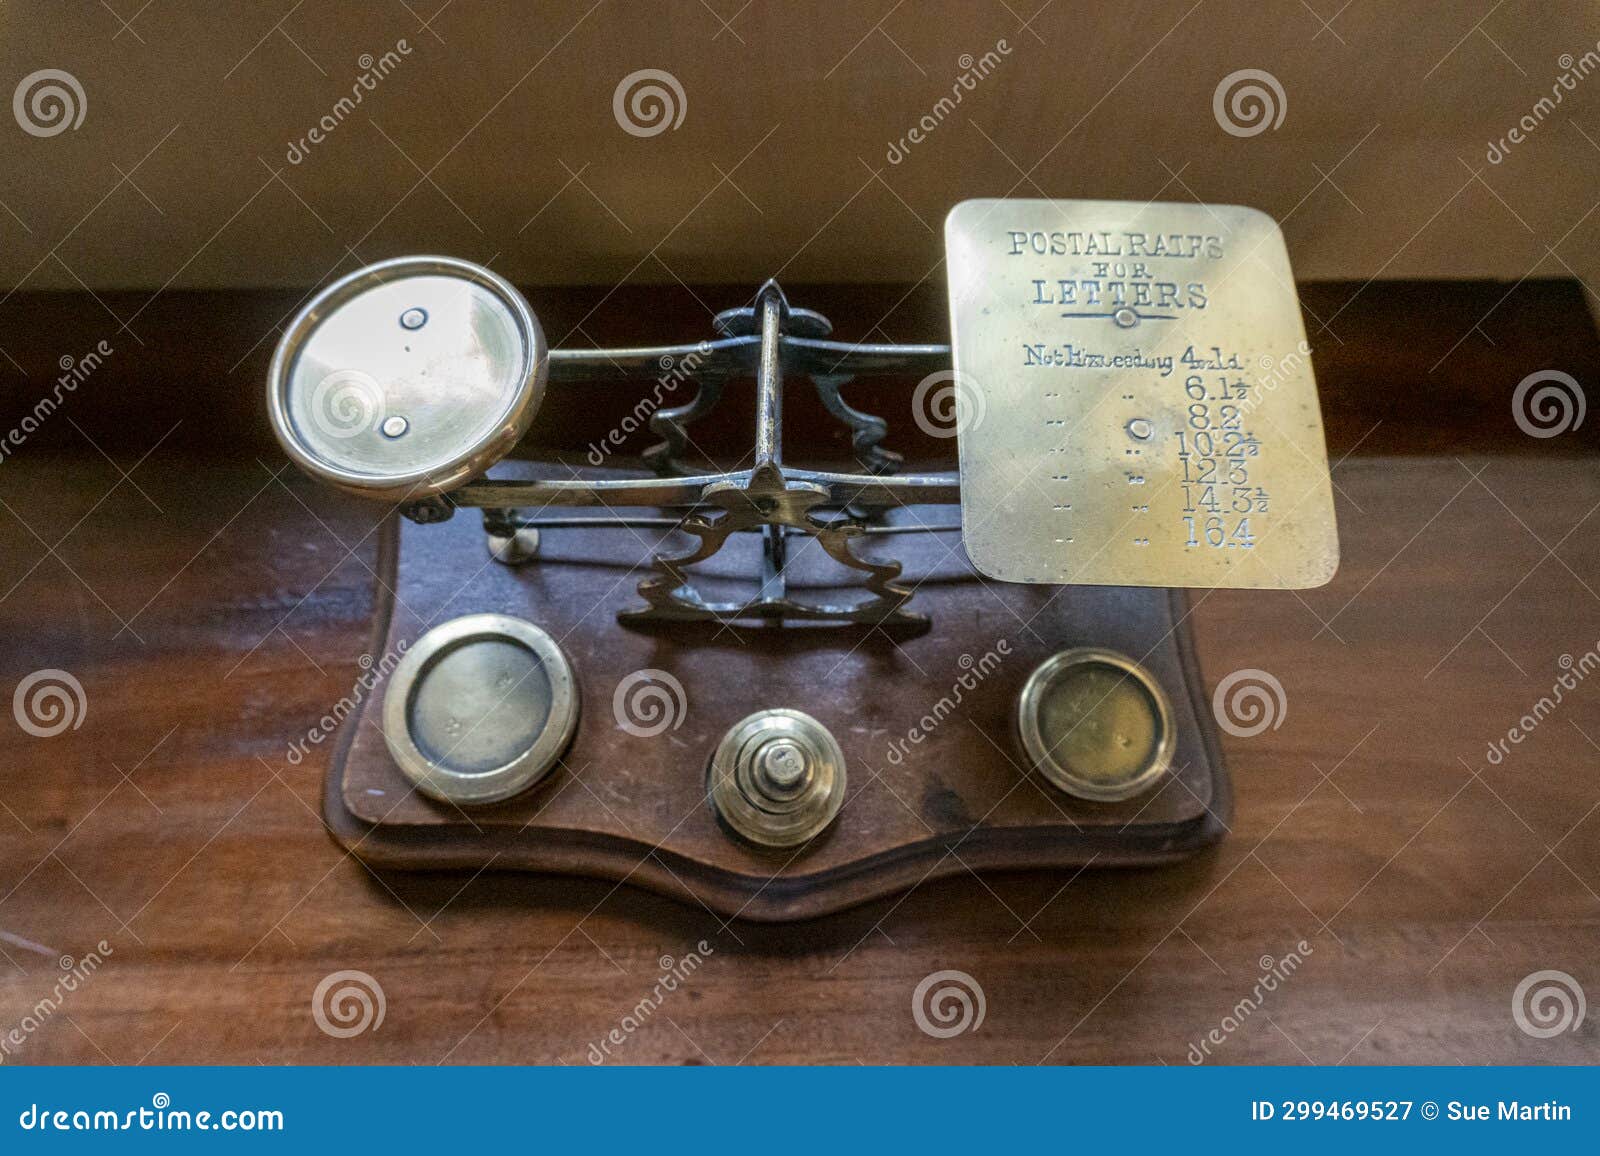 https://thumbs.dreamstime.com/z/th-century-postal-scales-set-brass-used-to-weigh-letters-determine-correct-postage-rate-299469527.jpg